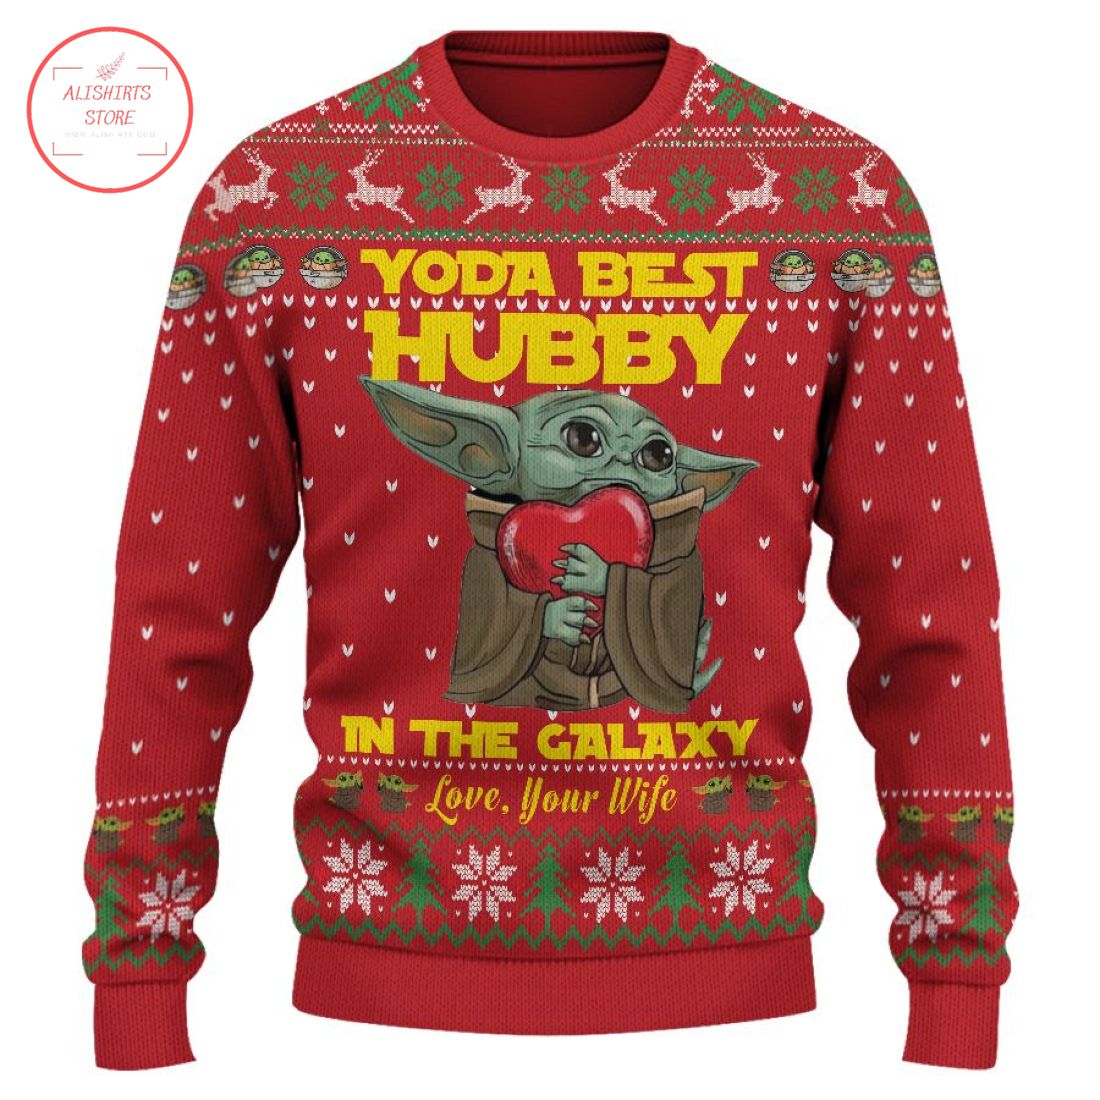 Yoda Best Hubby in the Galaxy Love Your Wife Ugly Christmas Sweater